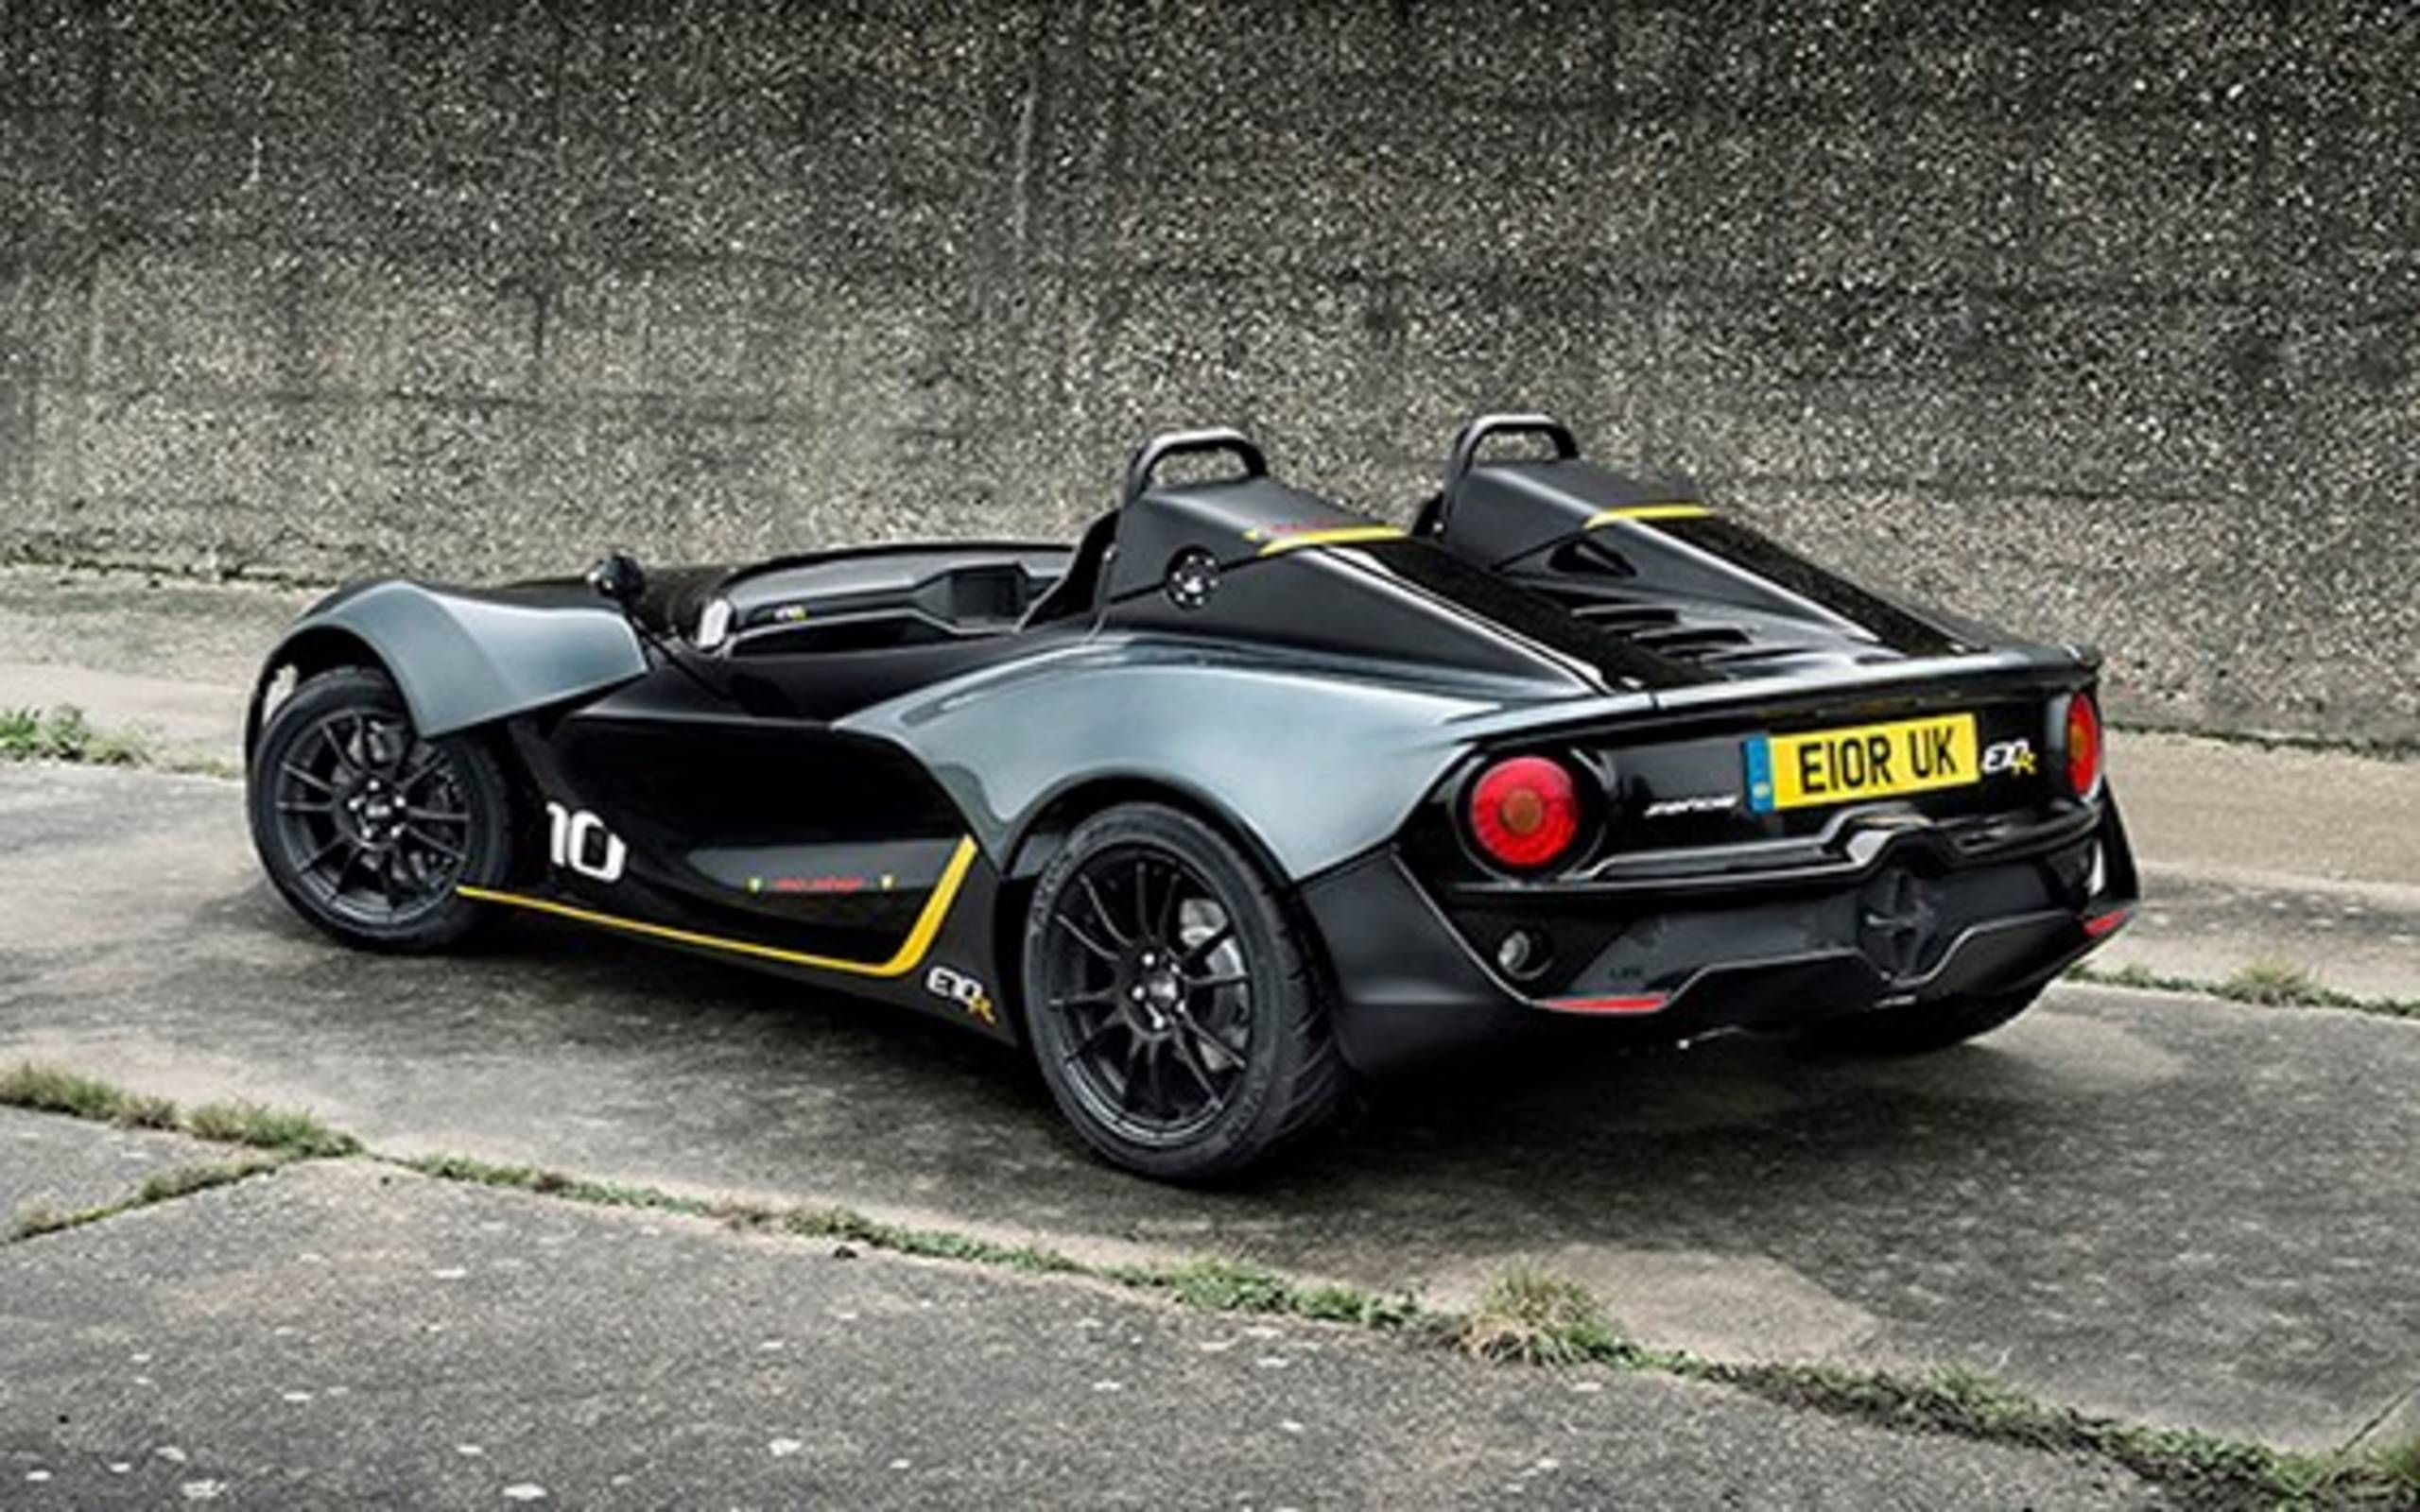 Zenos E10R is fast, obscure and coming to America